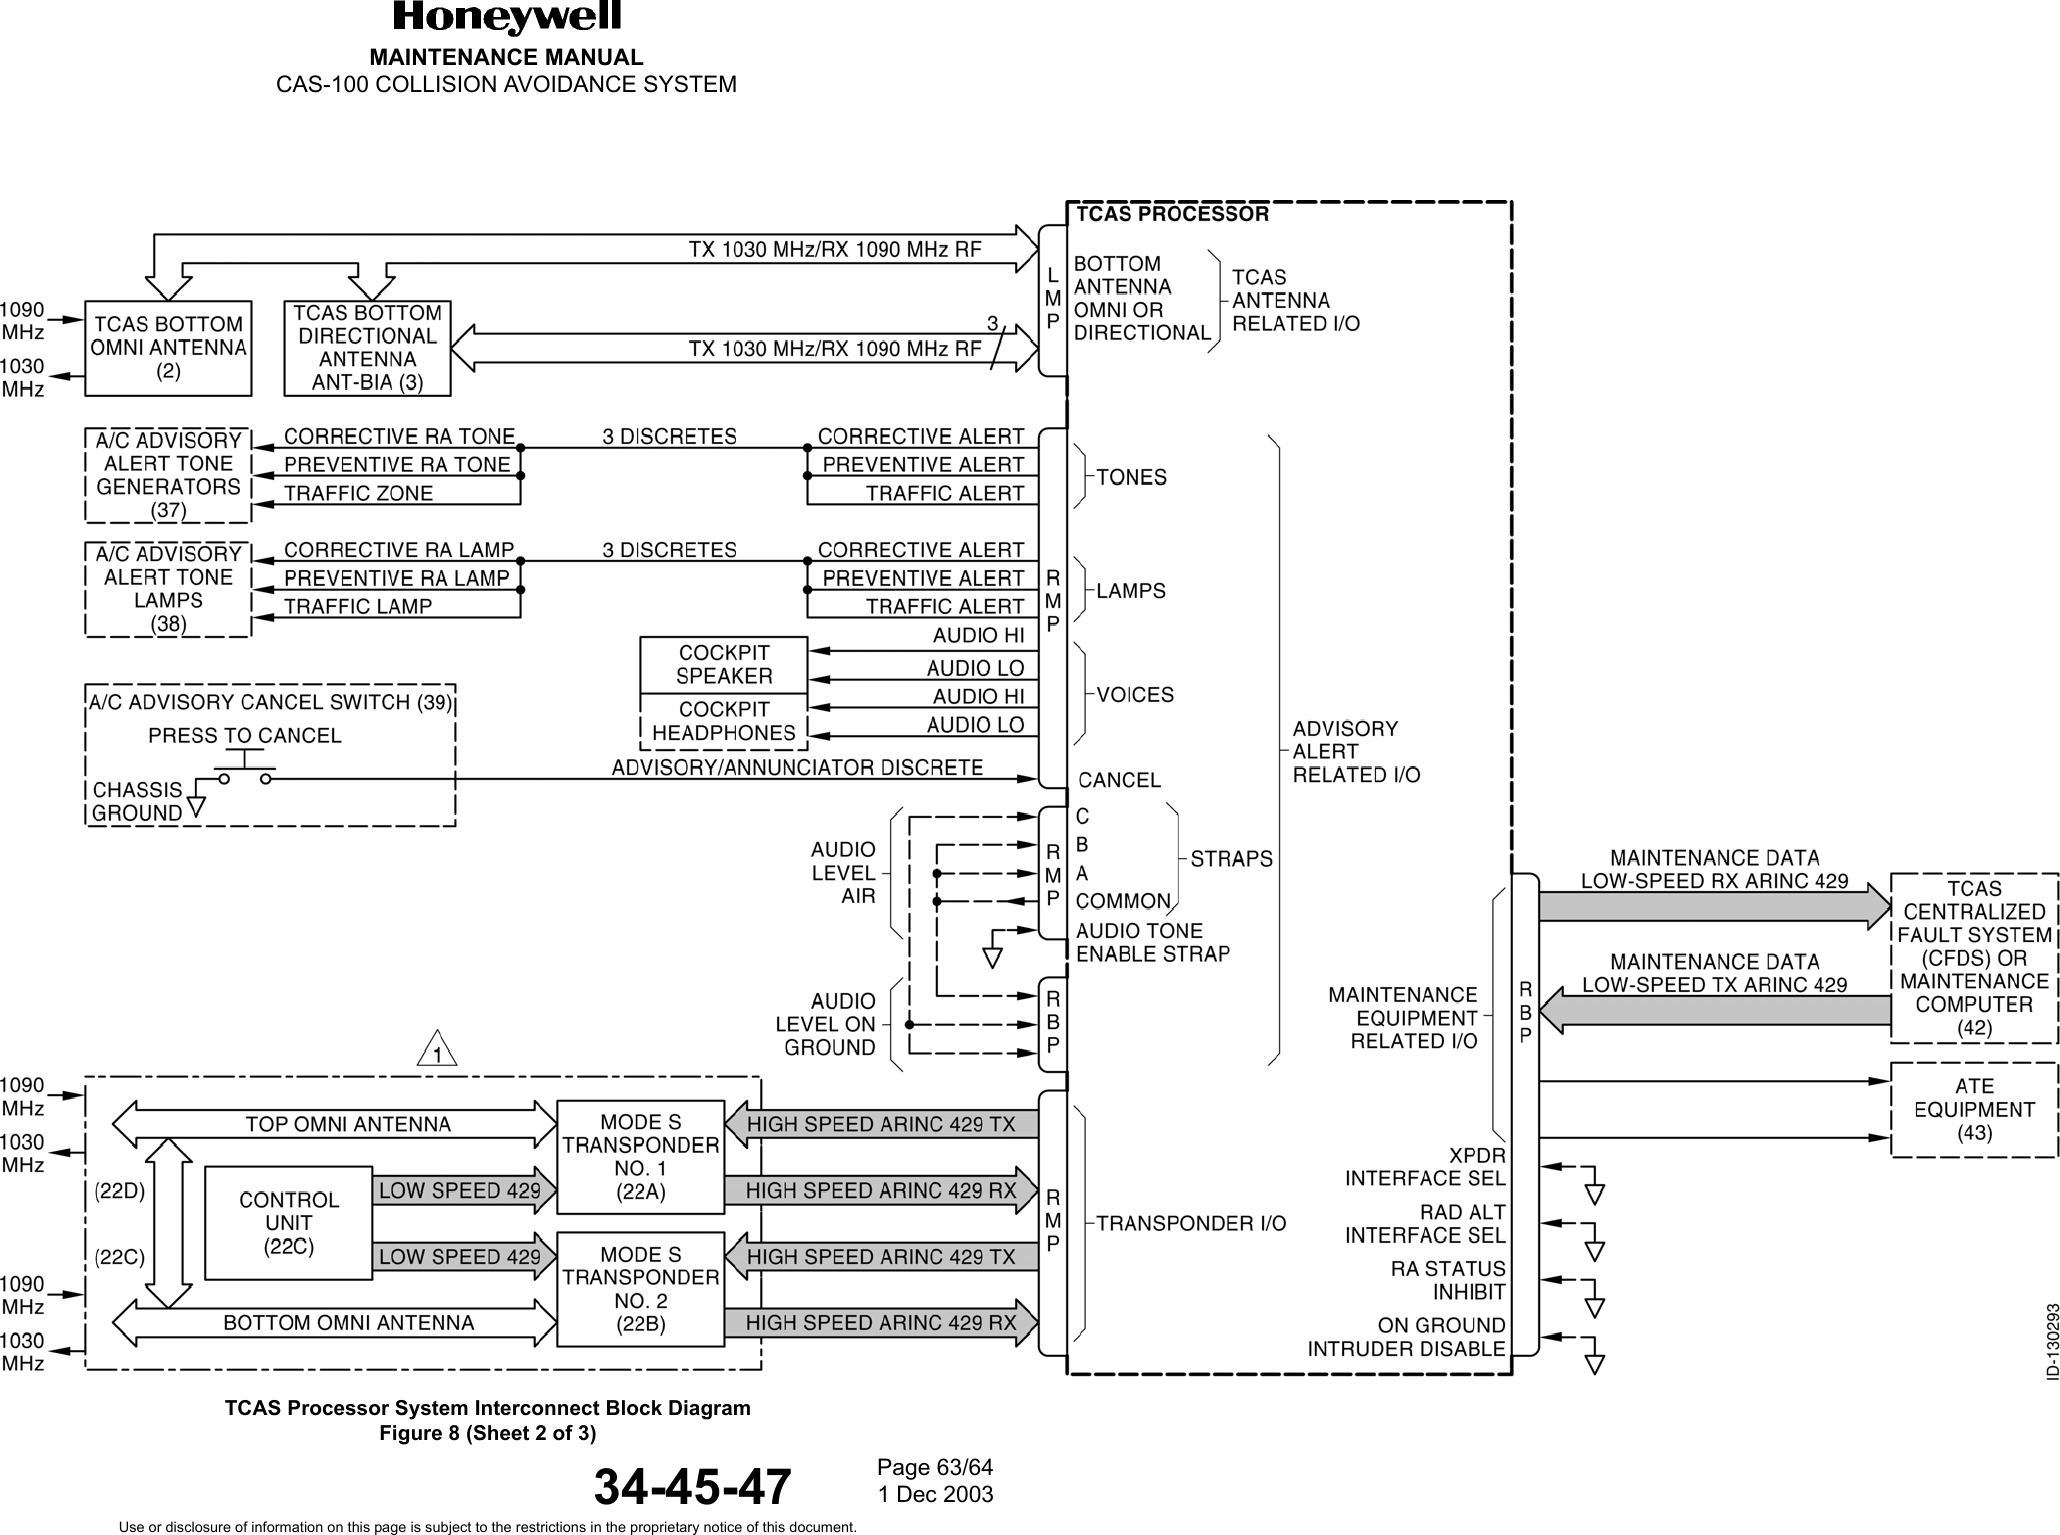 MAINTENANCE MANUALCAS-100 COLLISION AVOIDANCE SYSTEM34-45-47TCAS Processor System Interconnect Block DiagramFigure 8 (Sheet 2 of 3)Page 63/641 Dec 2003Use or disclosure of information on this page is subject to the restrictions in the proprietary notice of this document.